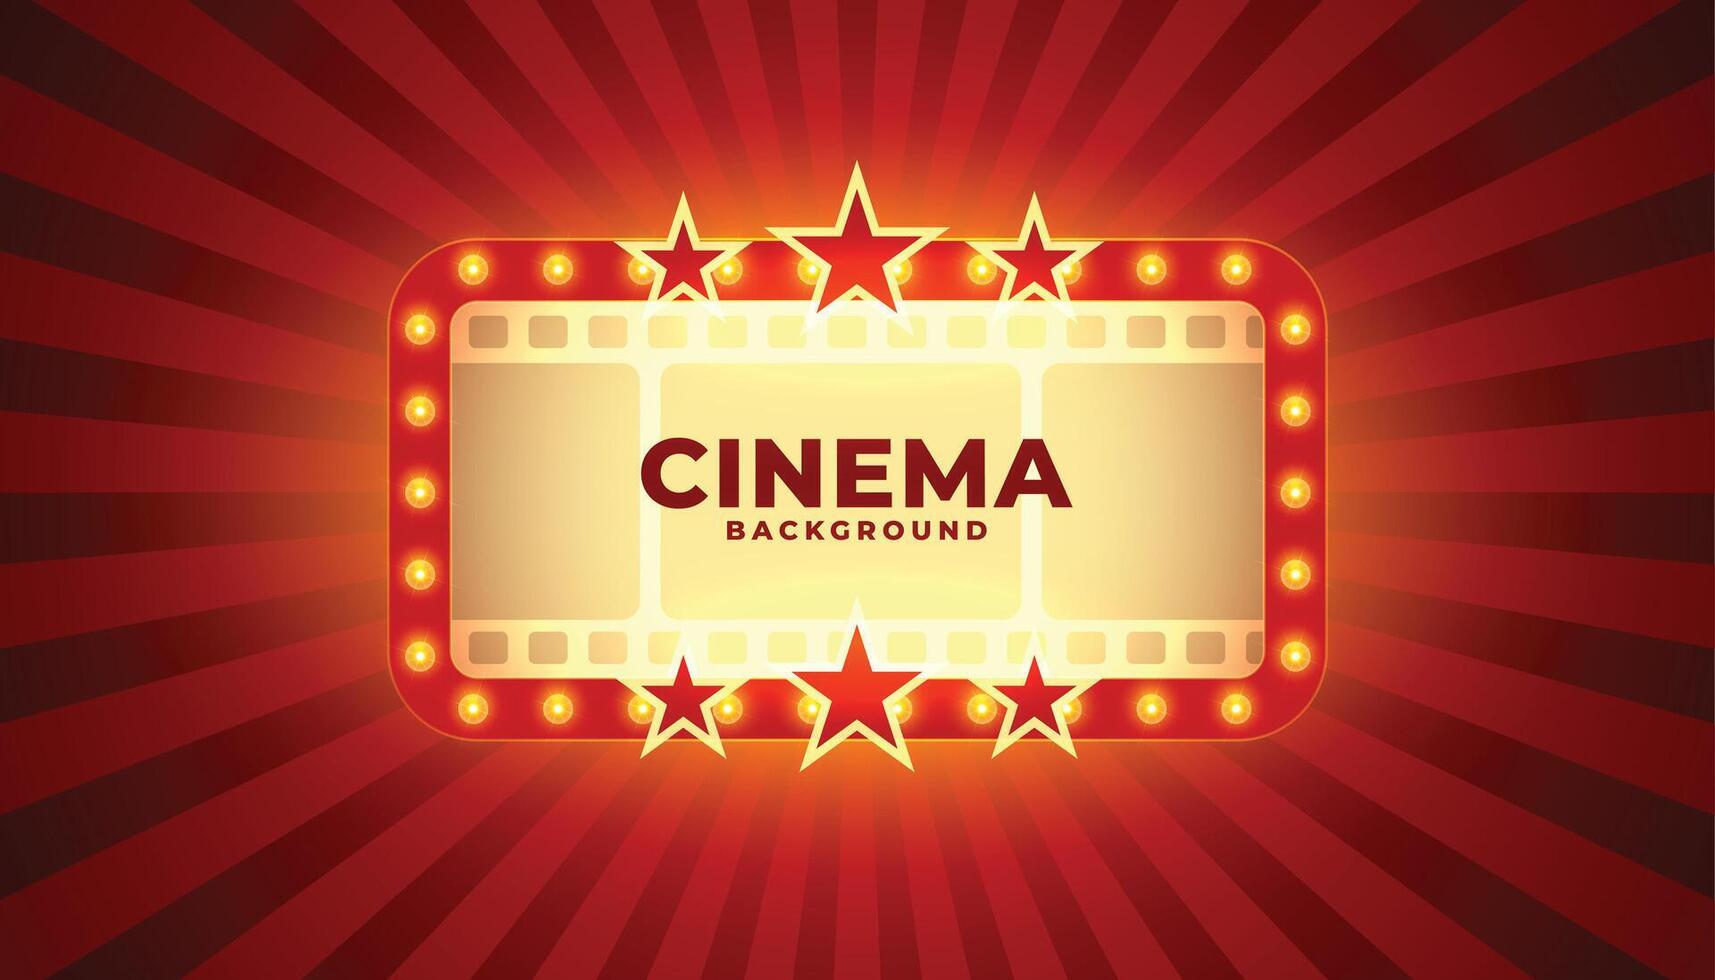 retro style cinema background with stars and film reel vector